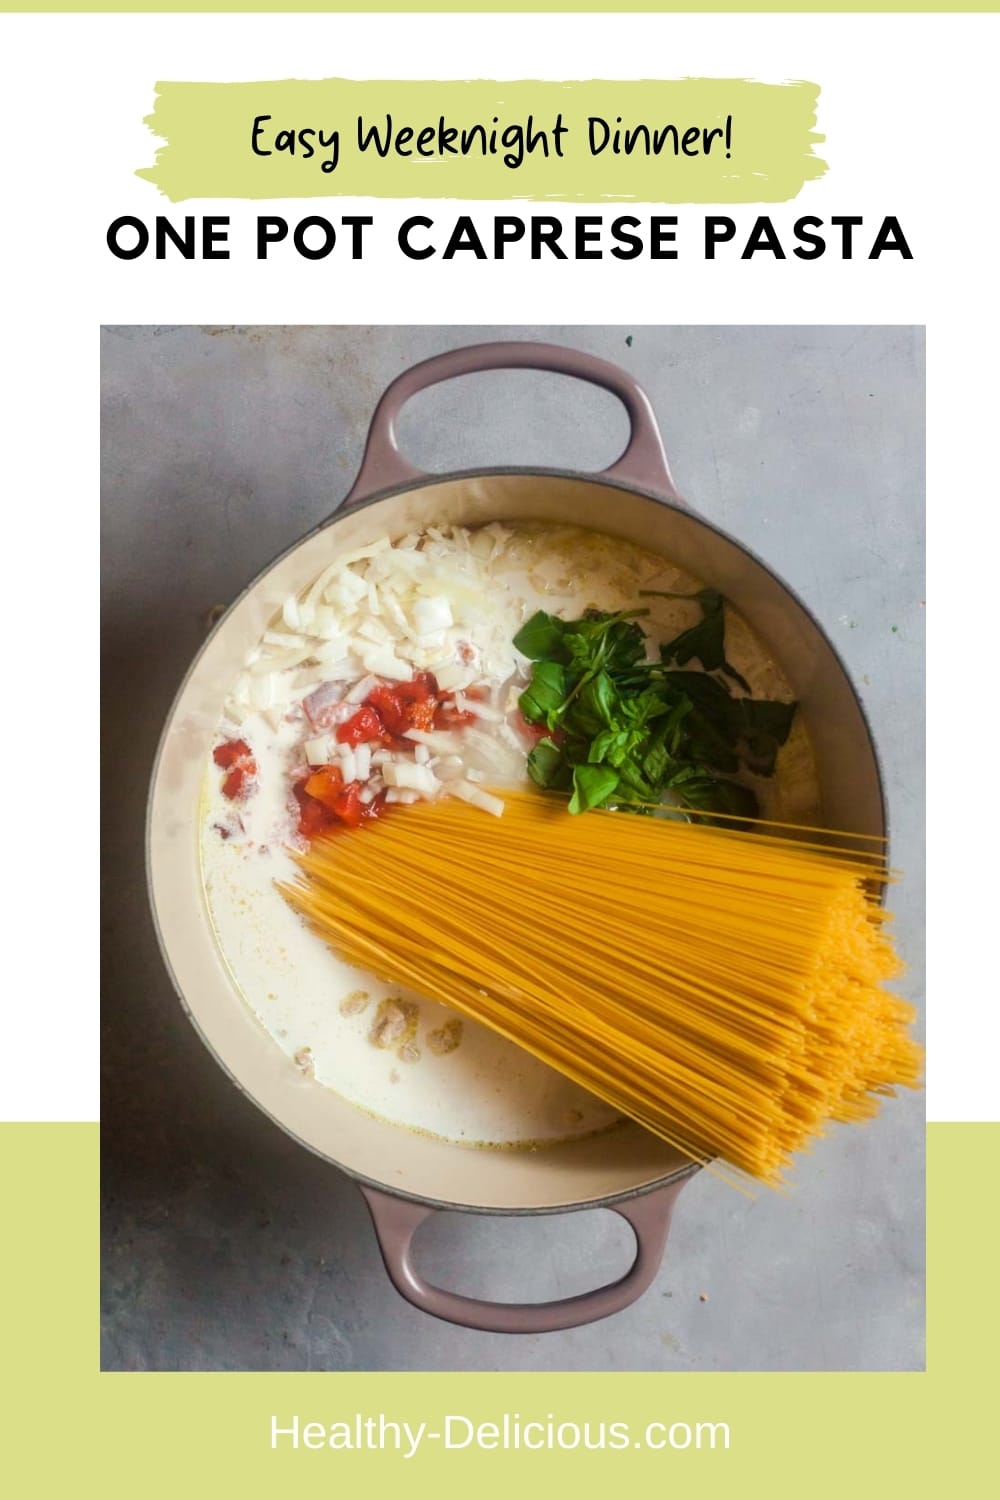 Fuss-free one pot pasta is a meal the whole family will love! This 20-minute recipe is inspired by caprese salad, with fire-roasted tomatoes, mozzarella, and plenty of fresh basil. You'll look forward to eating it all summer long! via @HealthyDelish